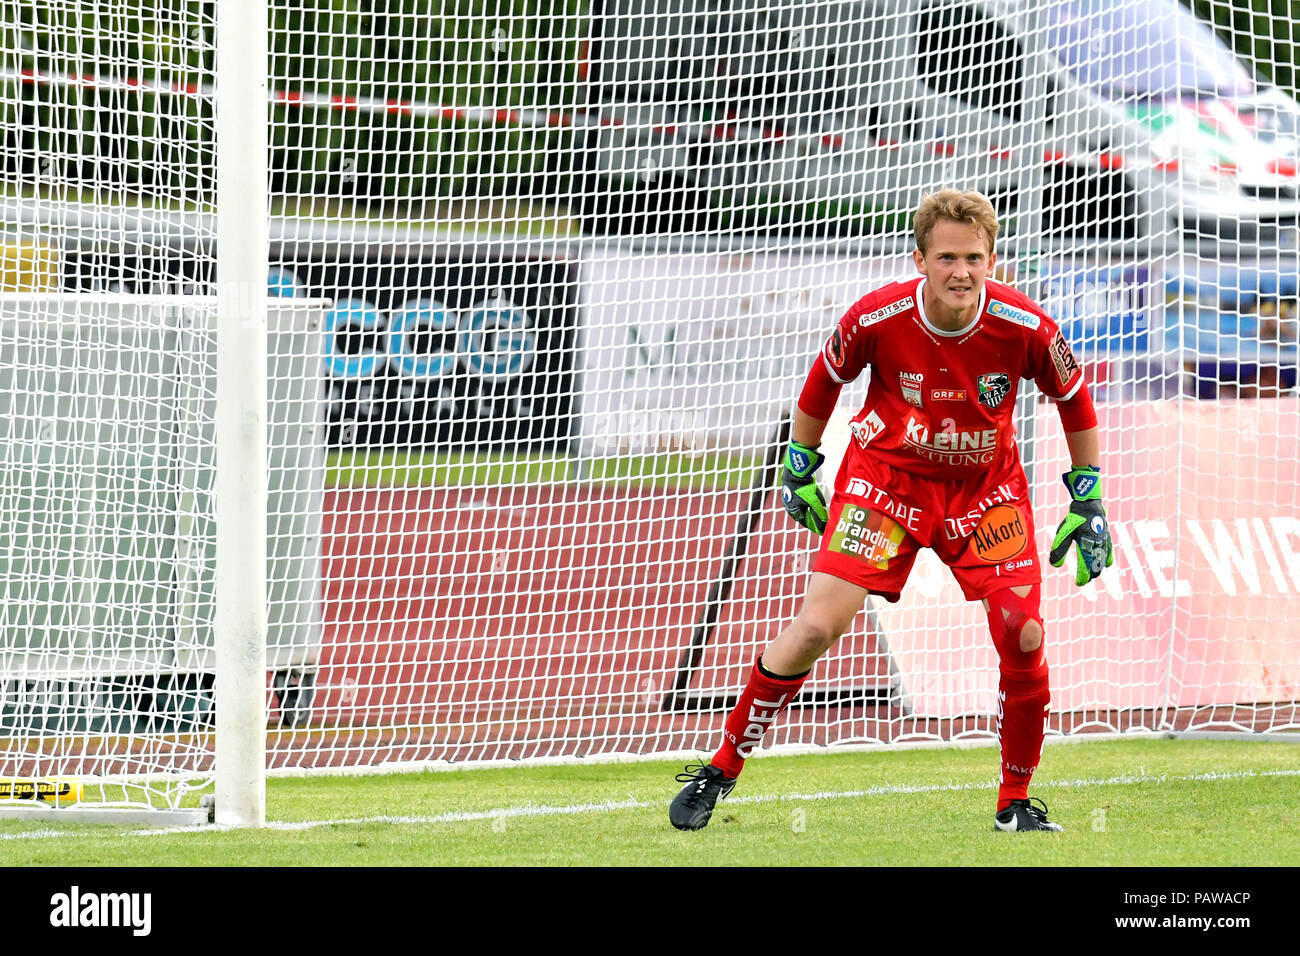 Wolfsberger, Austria, 24 July 2018. The goalkeeper Dobnik during the pre season friendly football match between RZ Pellets WAC and Udinese Calcio at Lavanttal Arena. photo Simone Ferraro / Alamy Live News Stock Photo